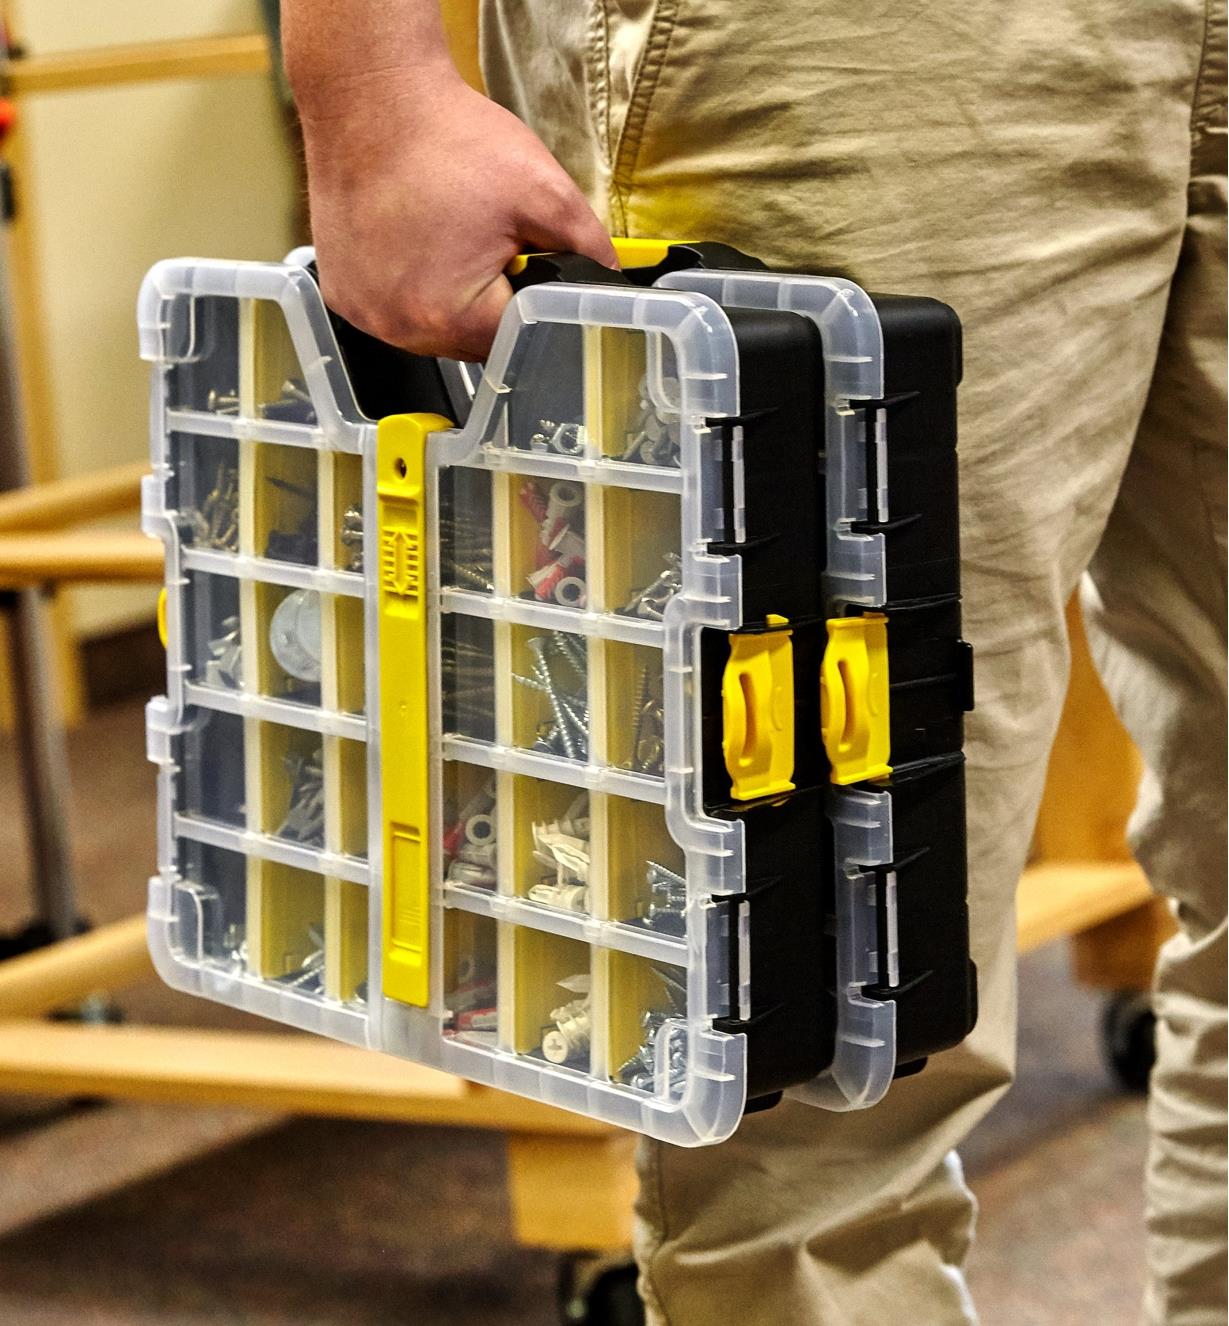 A person carries two 11" × 14" cases clipped together and filled with screws and drywall anchors